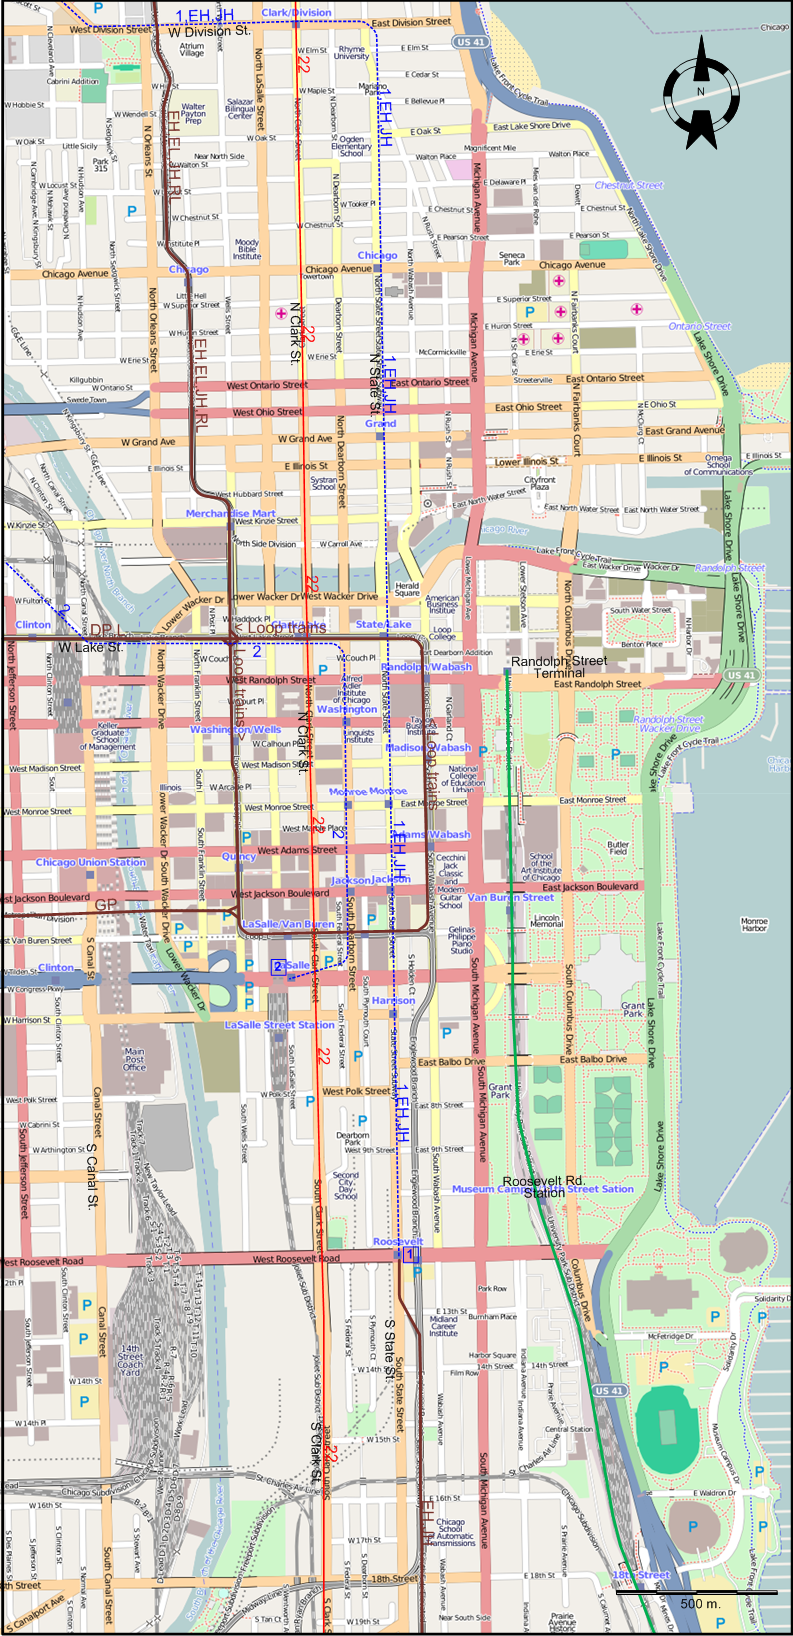 Chicago downtown tram map – 1957